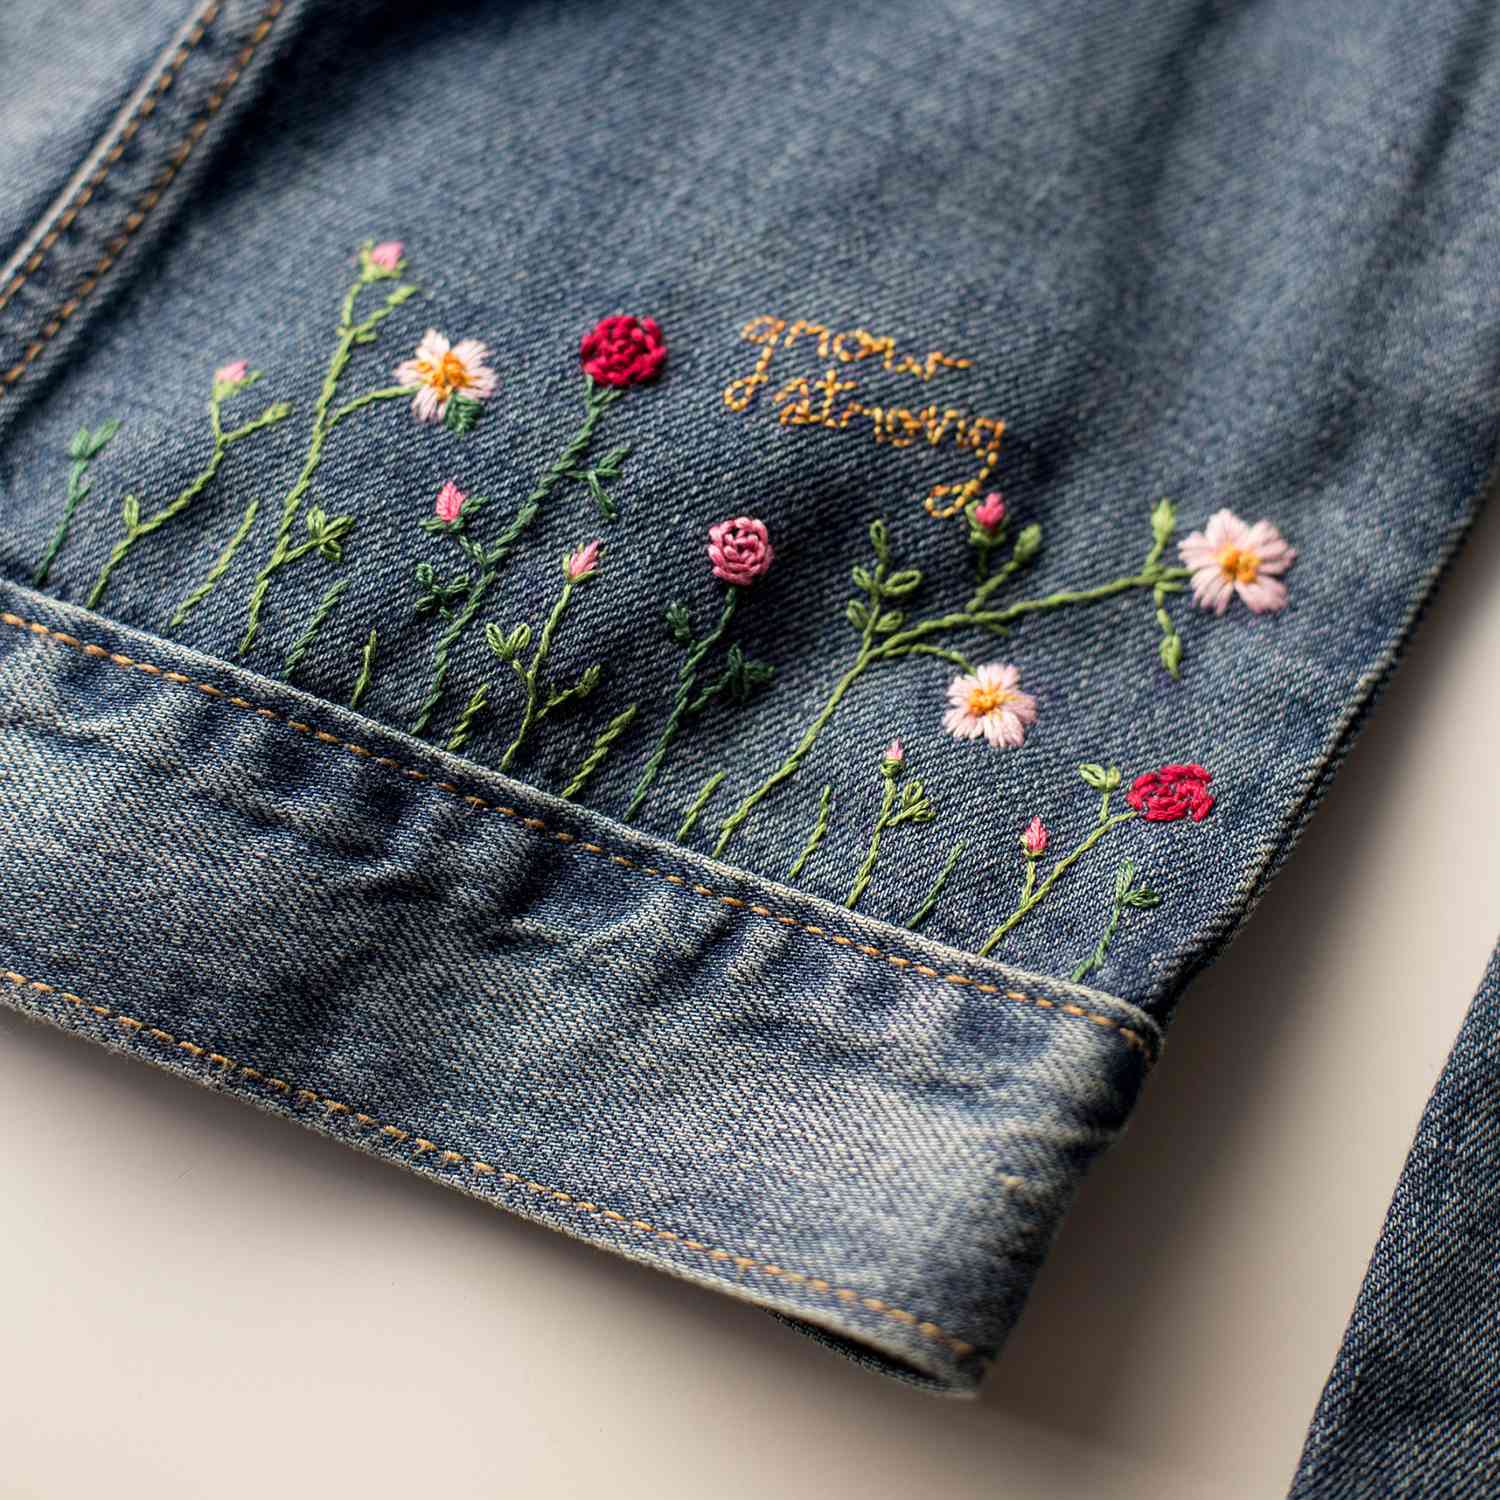 Embroidered Sew-On Patch for Jackets Jeans and More!